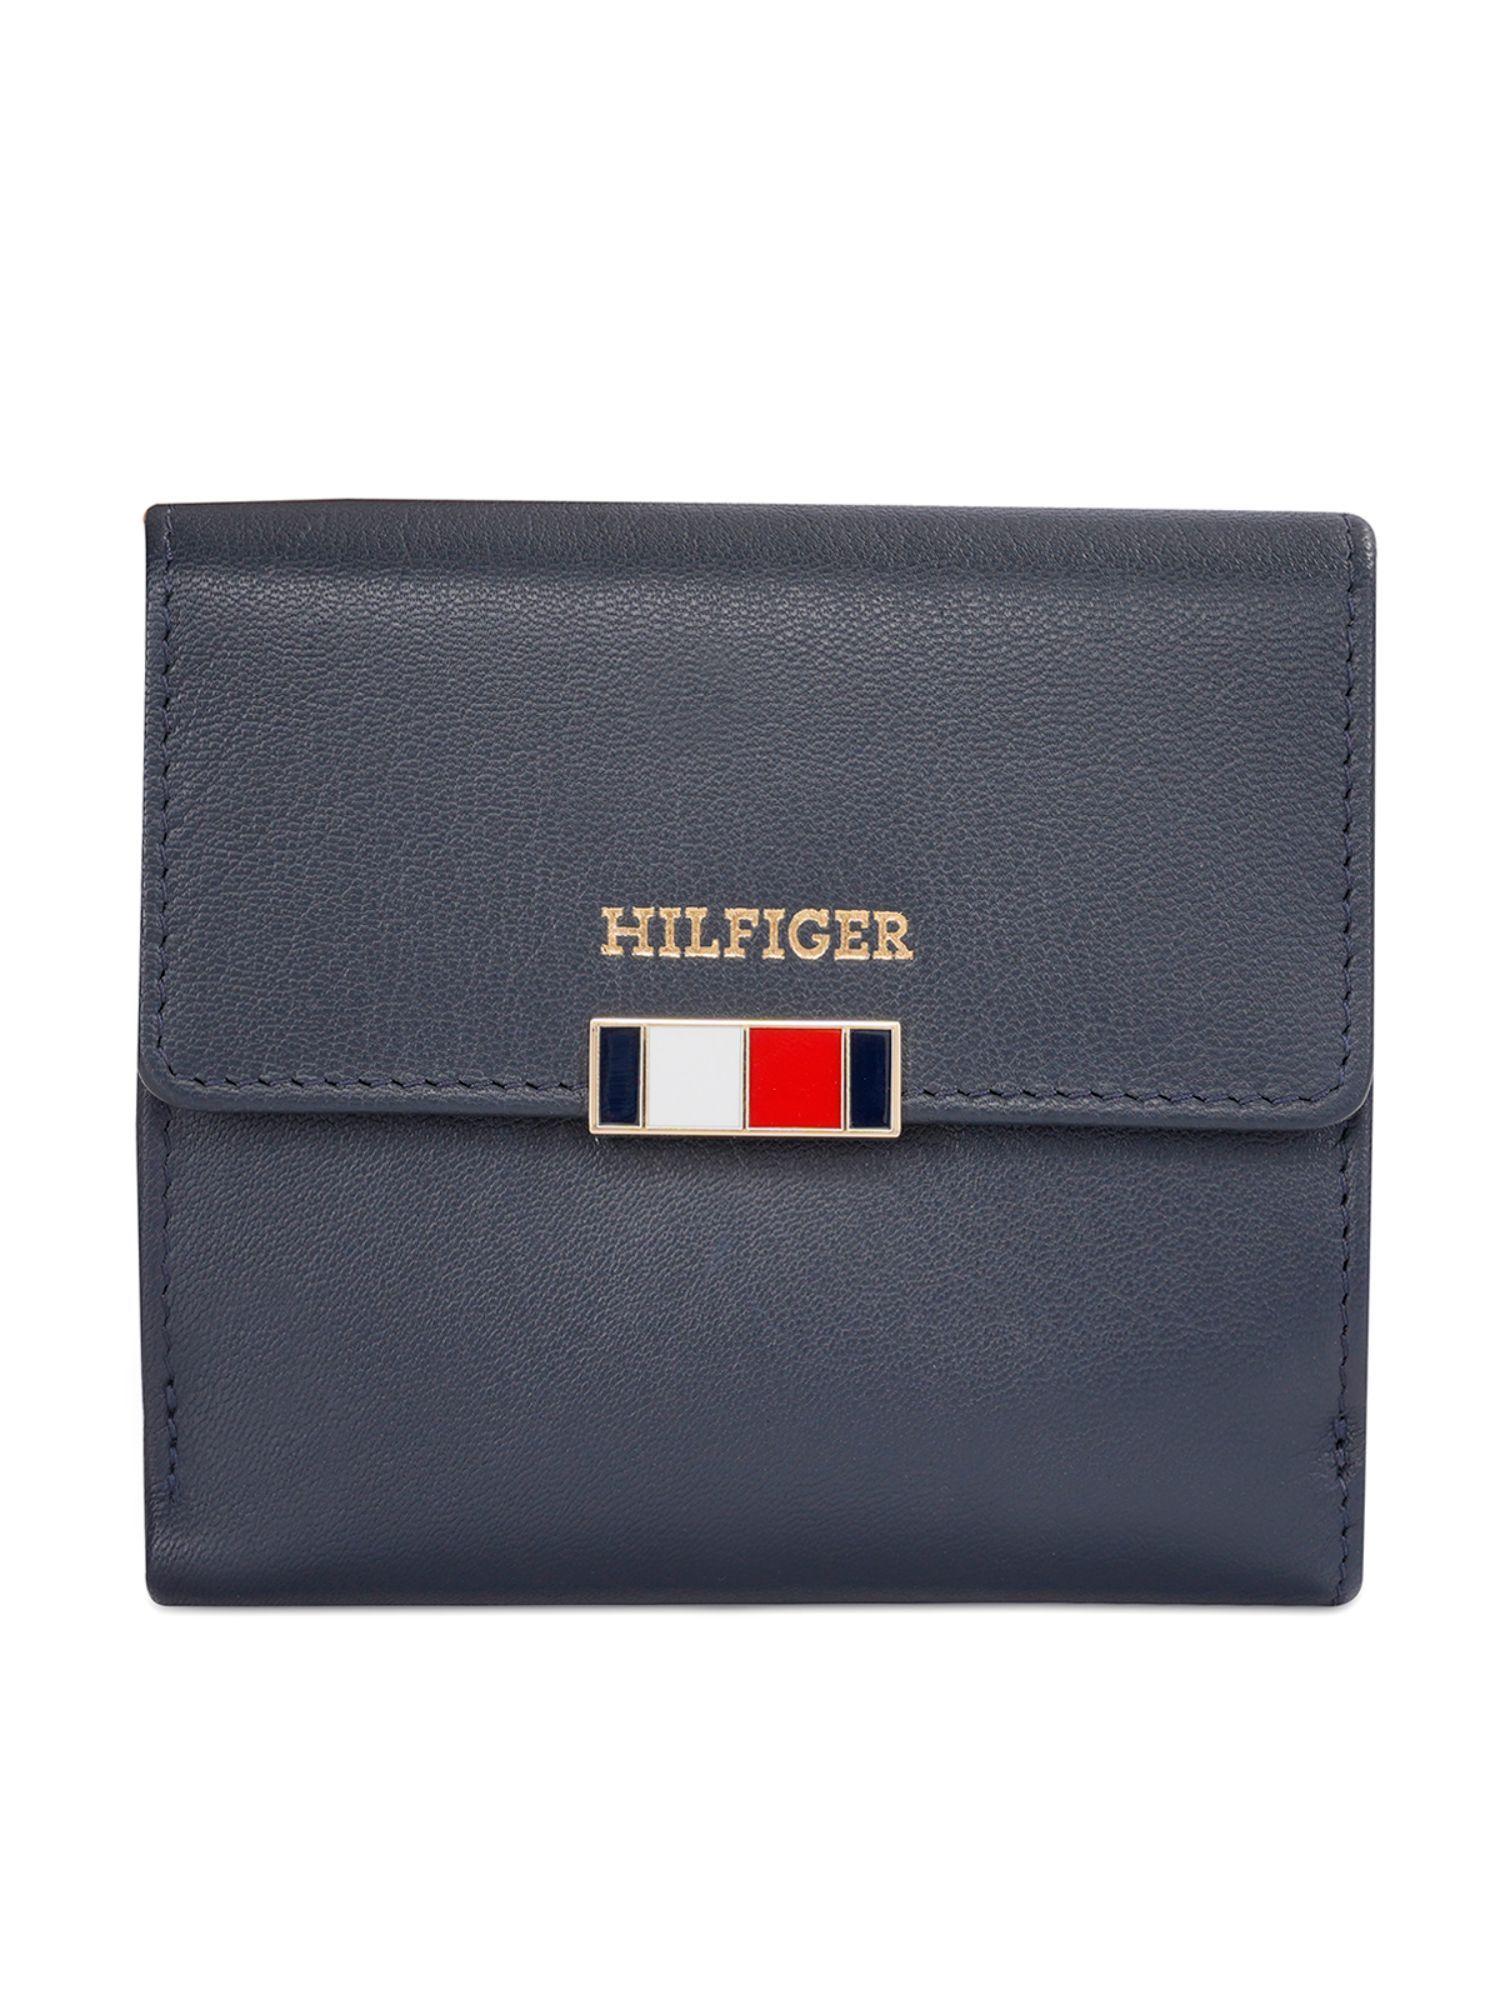 teresa women small flap wallet with sling - navy (set of 2)